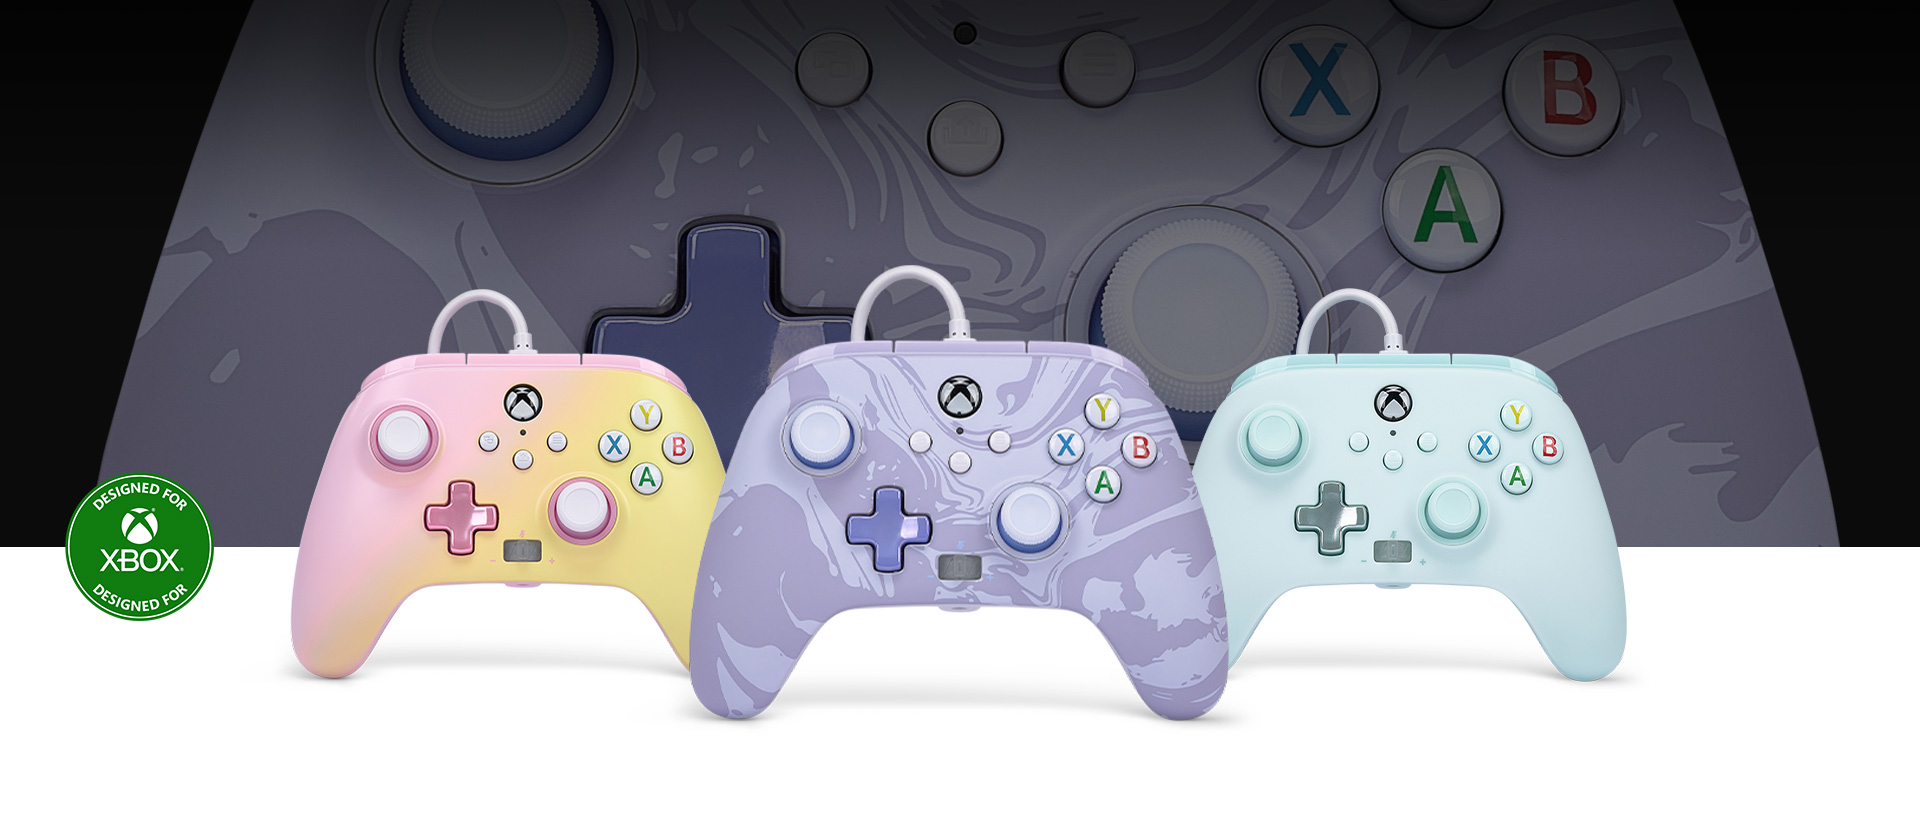 Designed for Xbox logo, Lavender Swirl controller in front with the Pink Lemonade and Cotton Candy Blue controllers beside it